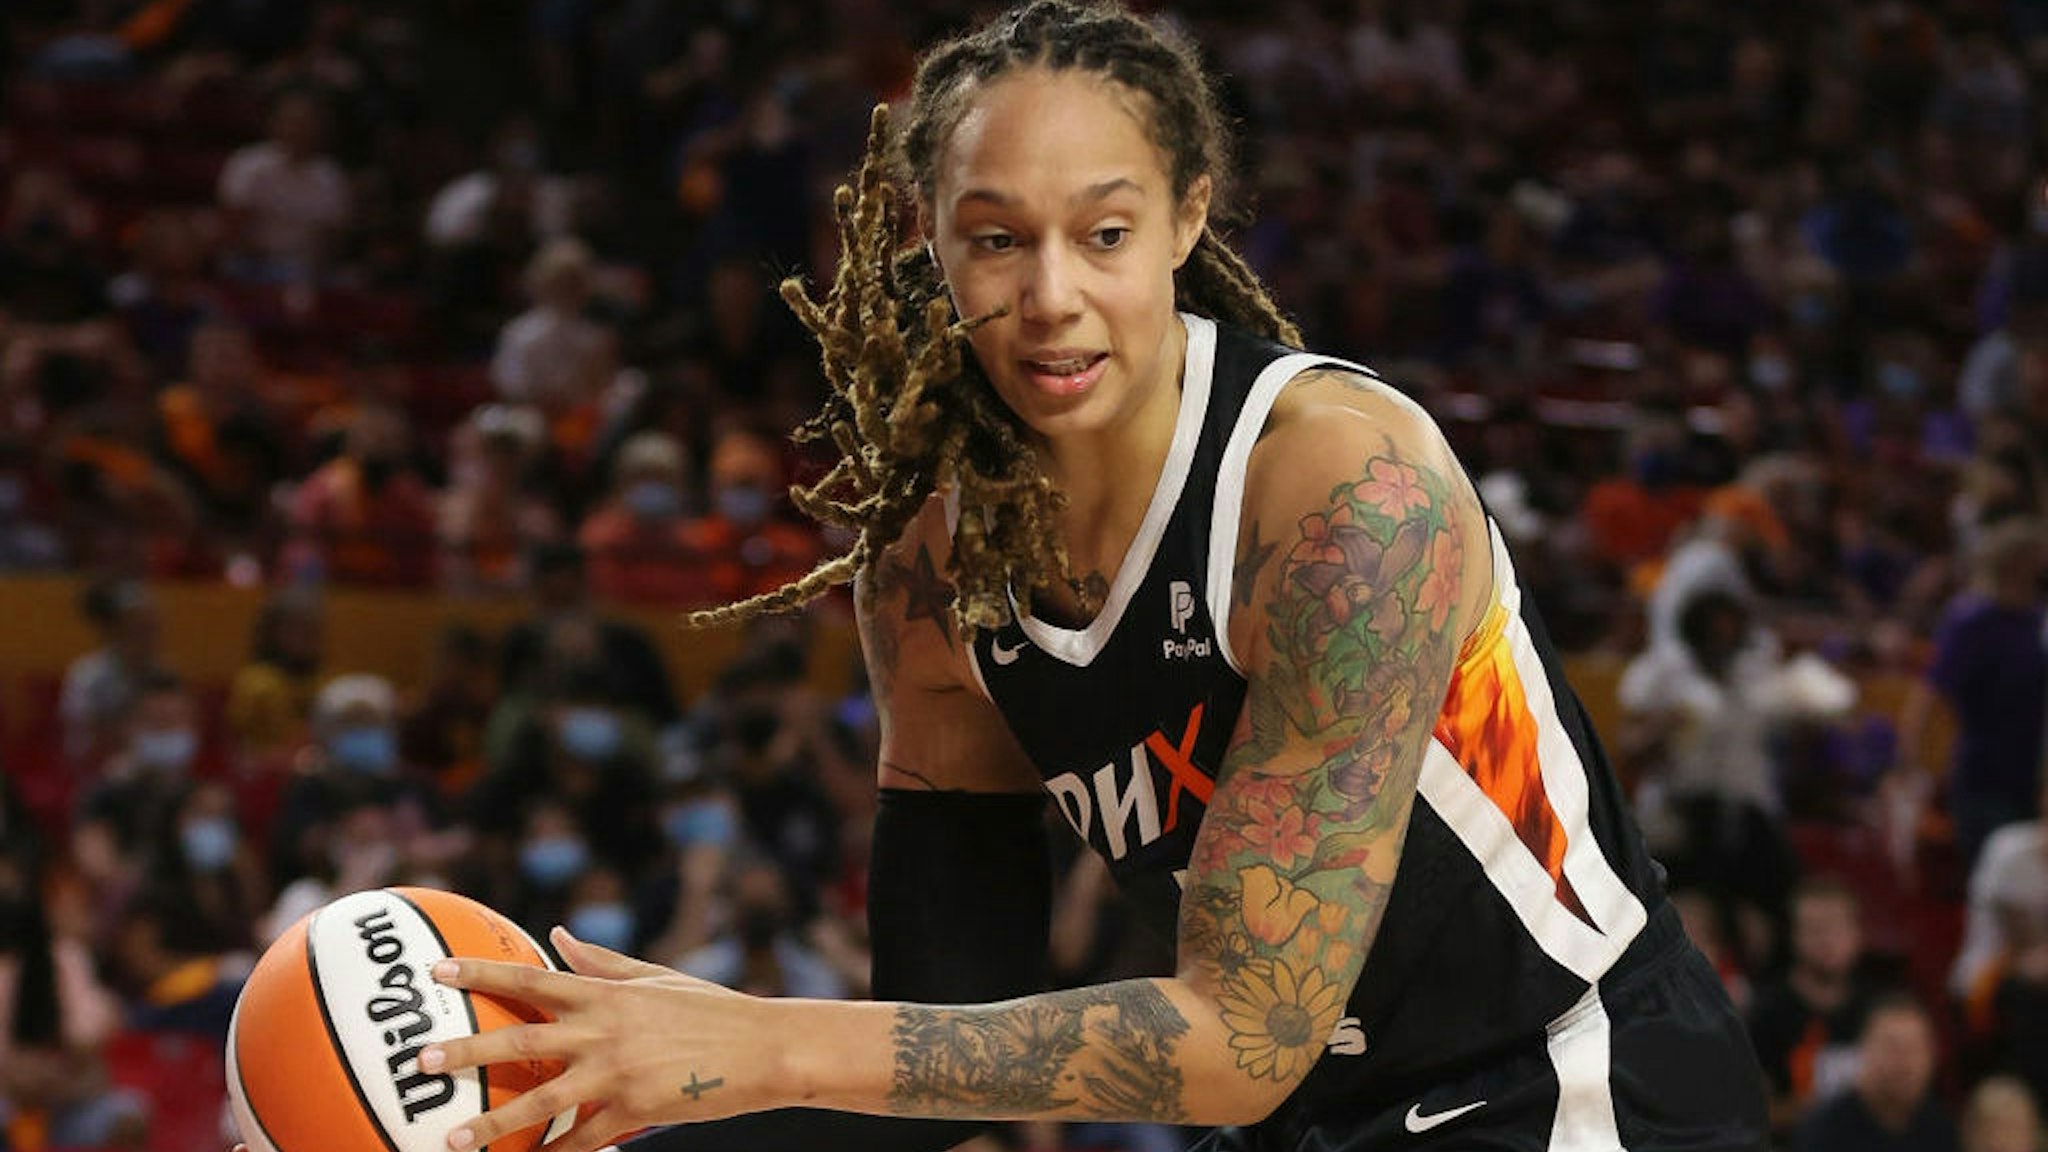 Brittney Griner's wife begged President Biden to help bring her spouse home from Russia, where she is being held on drug charges